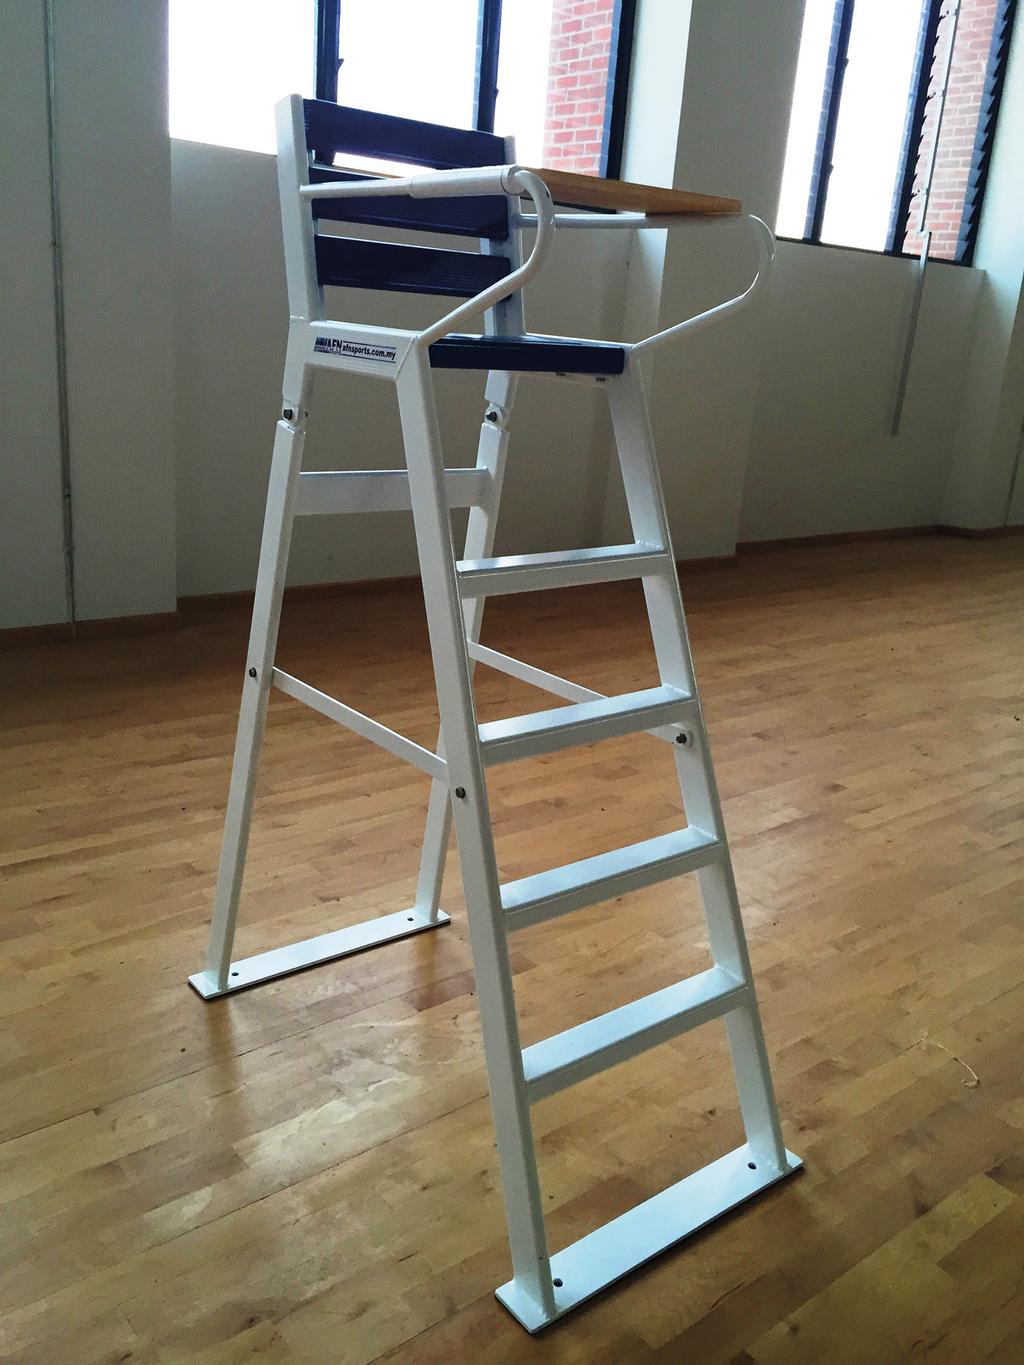 Umpire Chair, Deluxe Order No. 60121 The badminton umpire chair is made from special extra sturdy aluminium profiles.